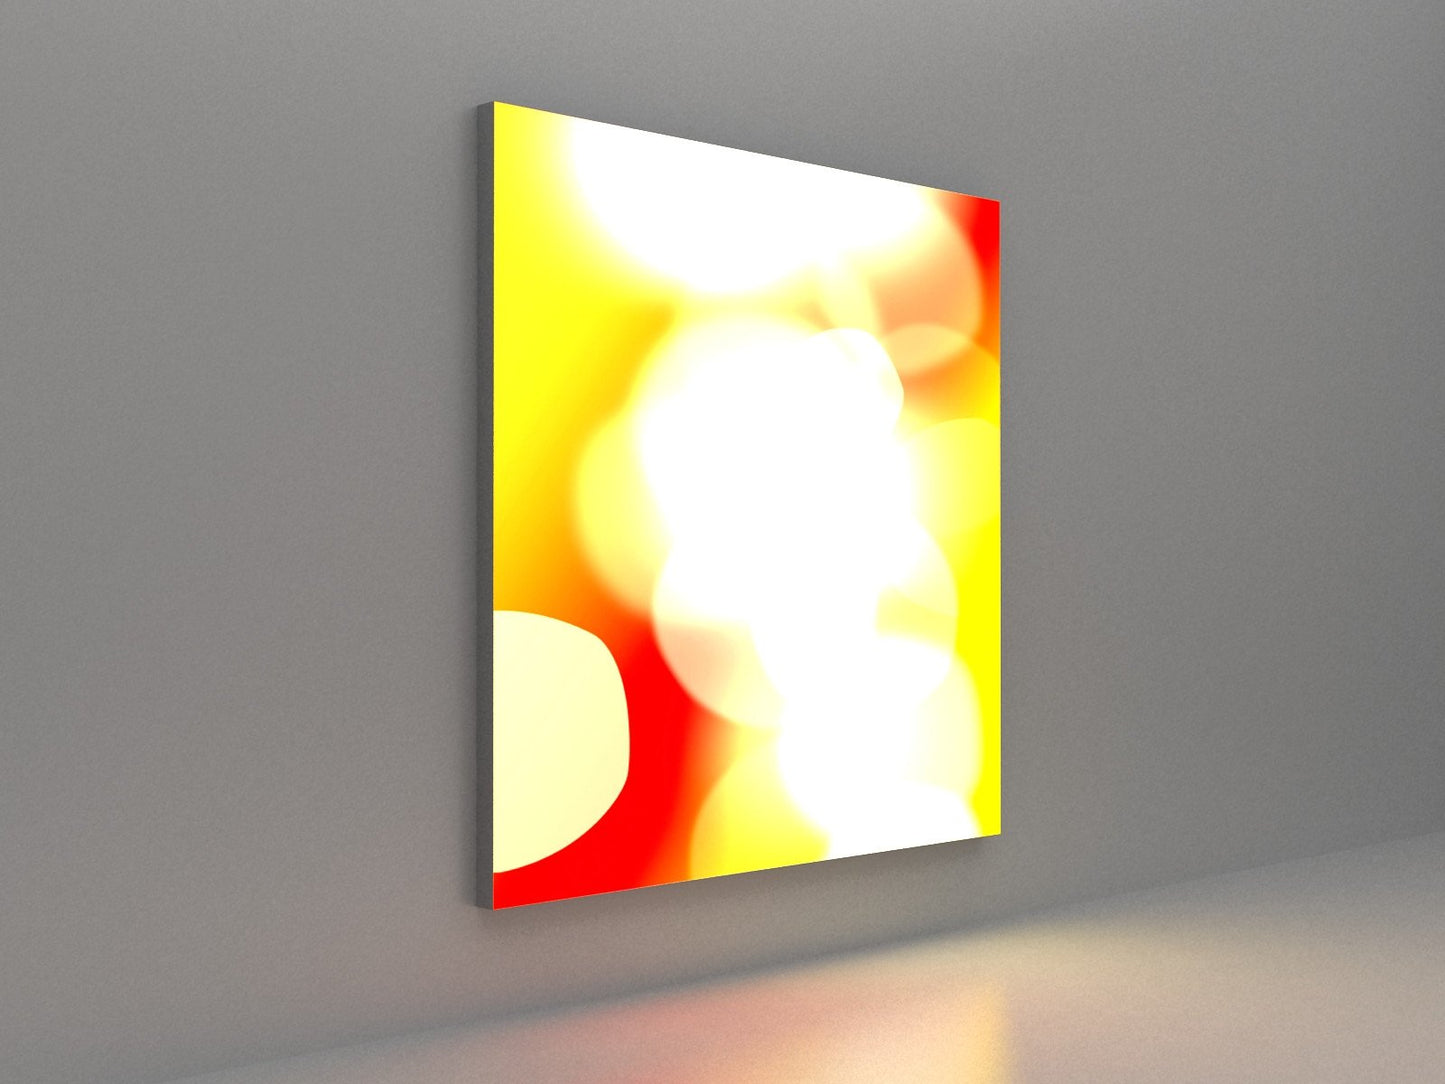 Fabric Faced Wall Mounted Light Box